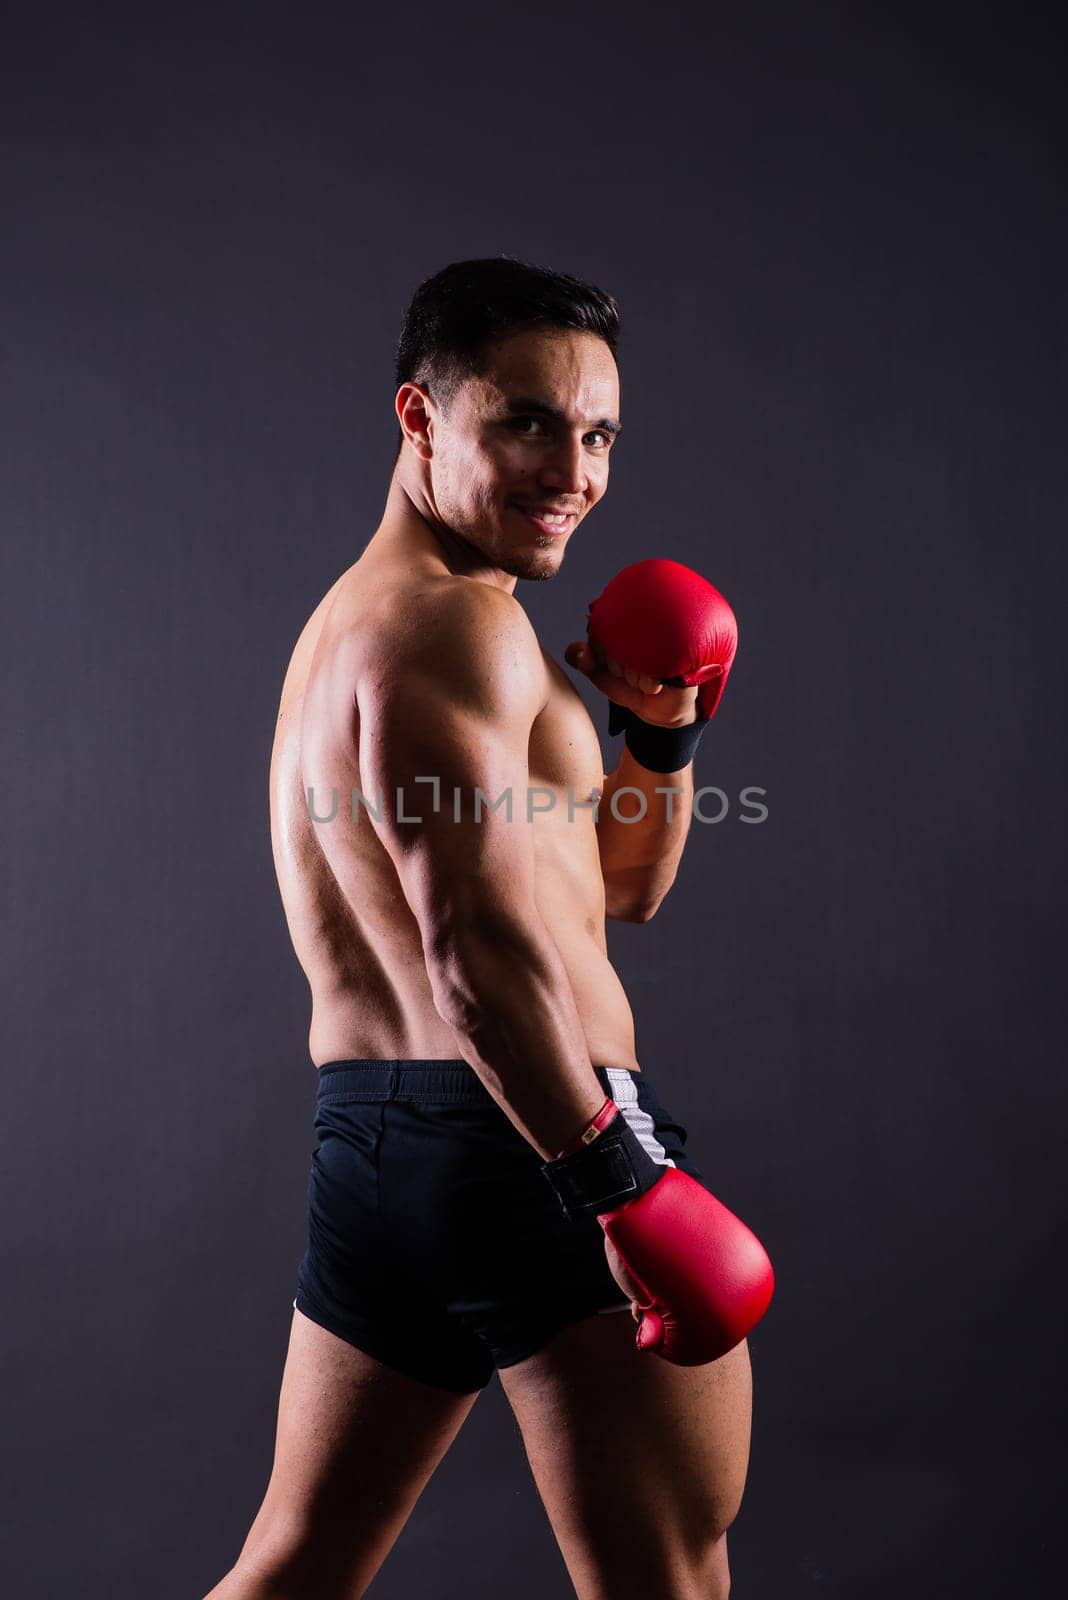 Boxing gloves, man training in sports fight, challenge or mma competition on studio background. by Zelenin